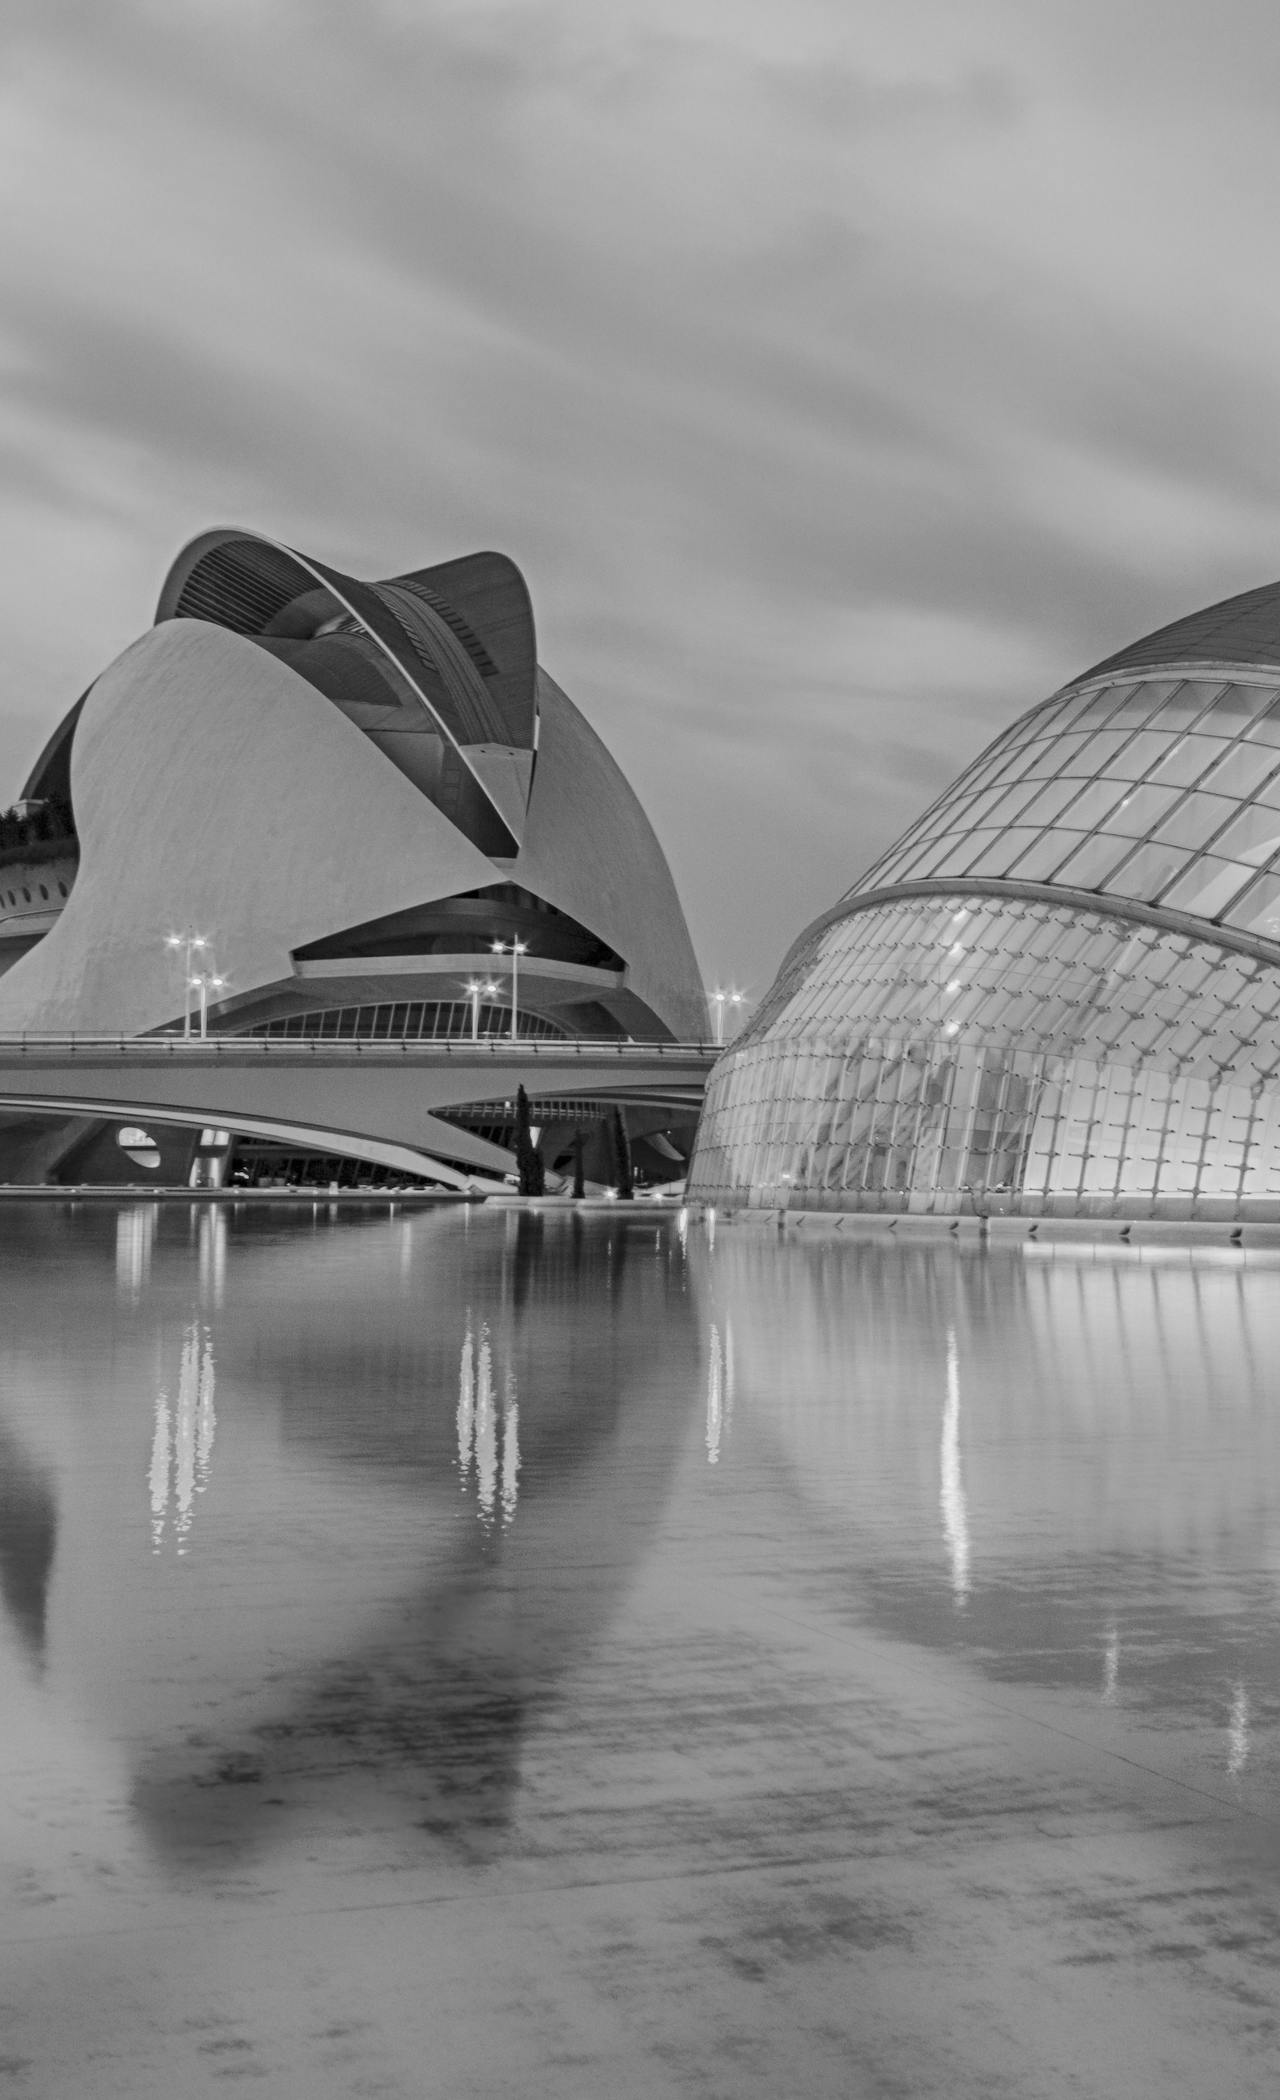 City of Arts and Sciences luggage storage in Valencia